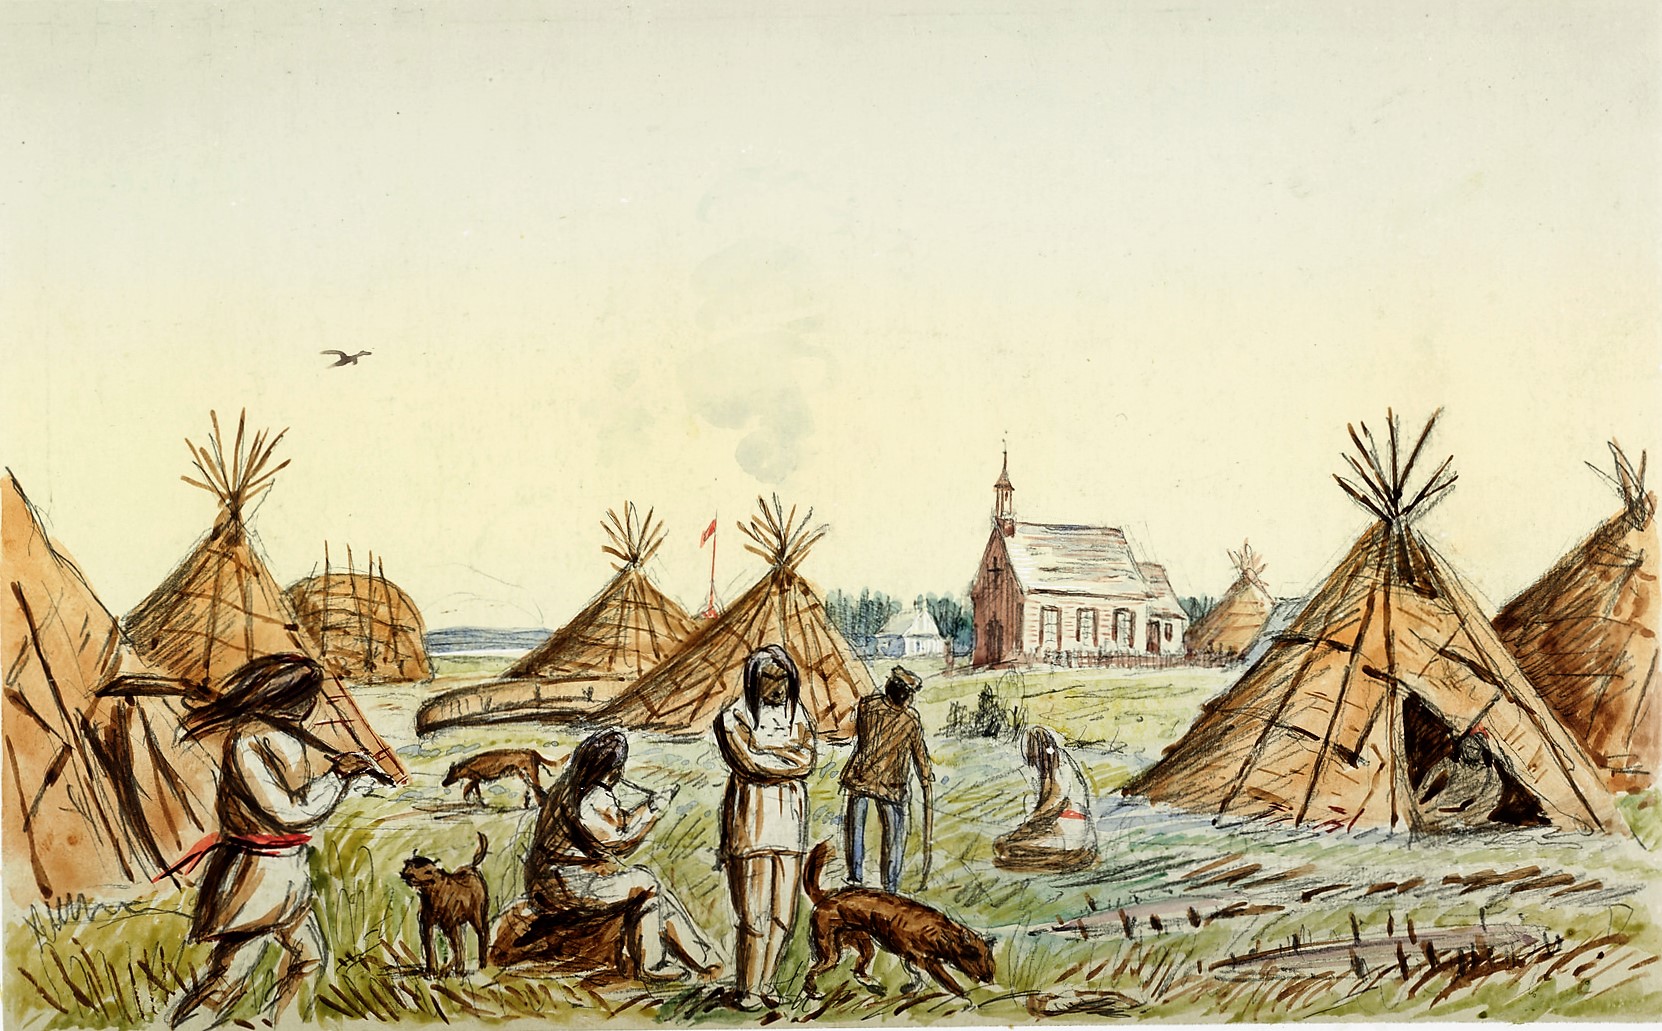 A stylized scene of a grassy field with a church in the far distance and a community of Indigenous peoples in the foreground.